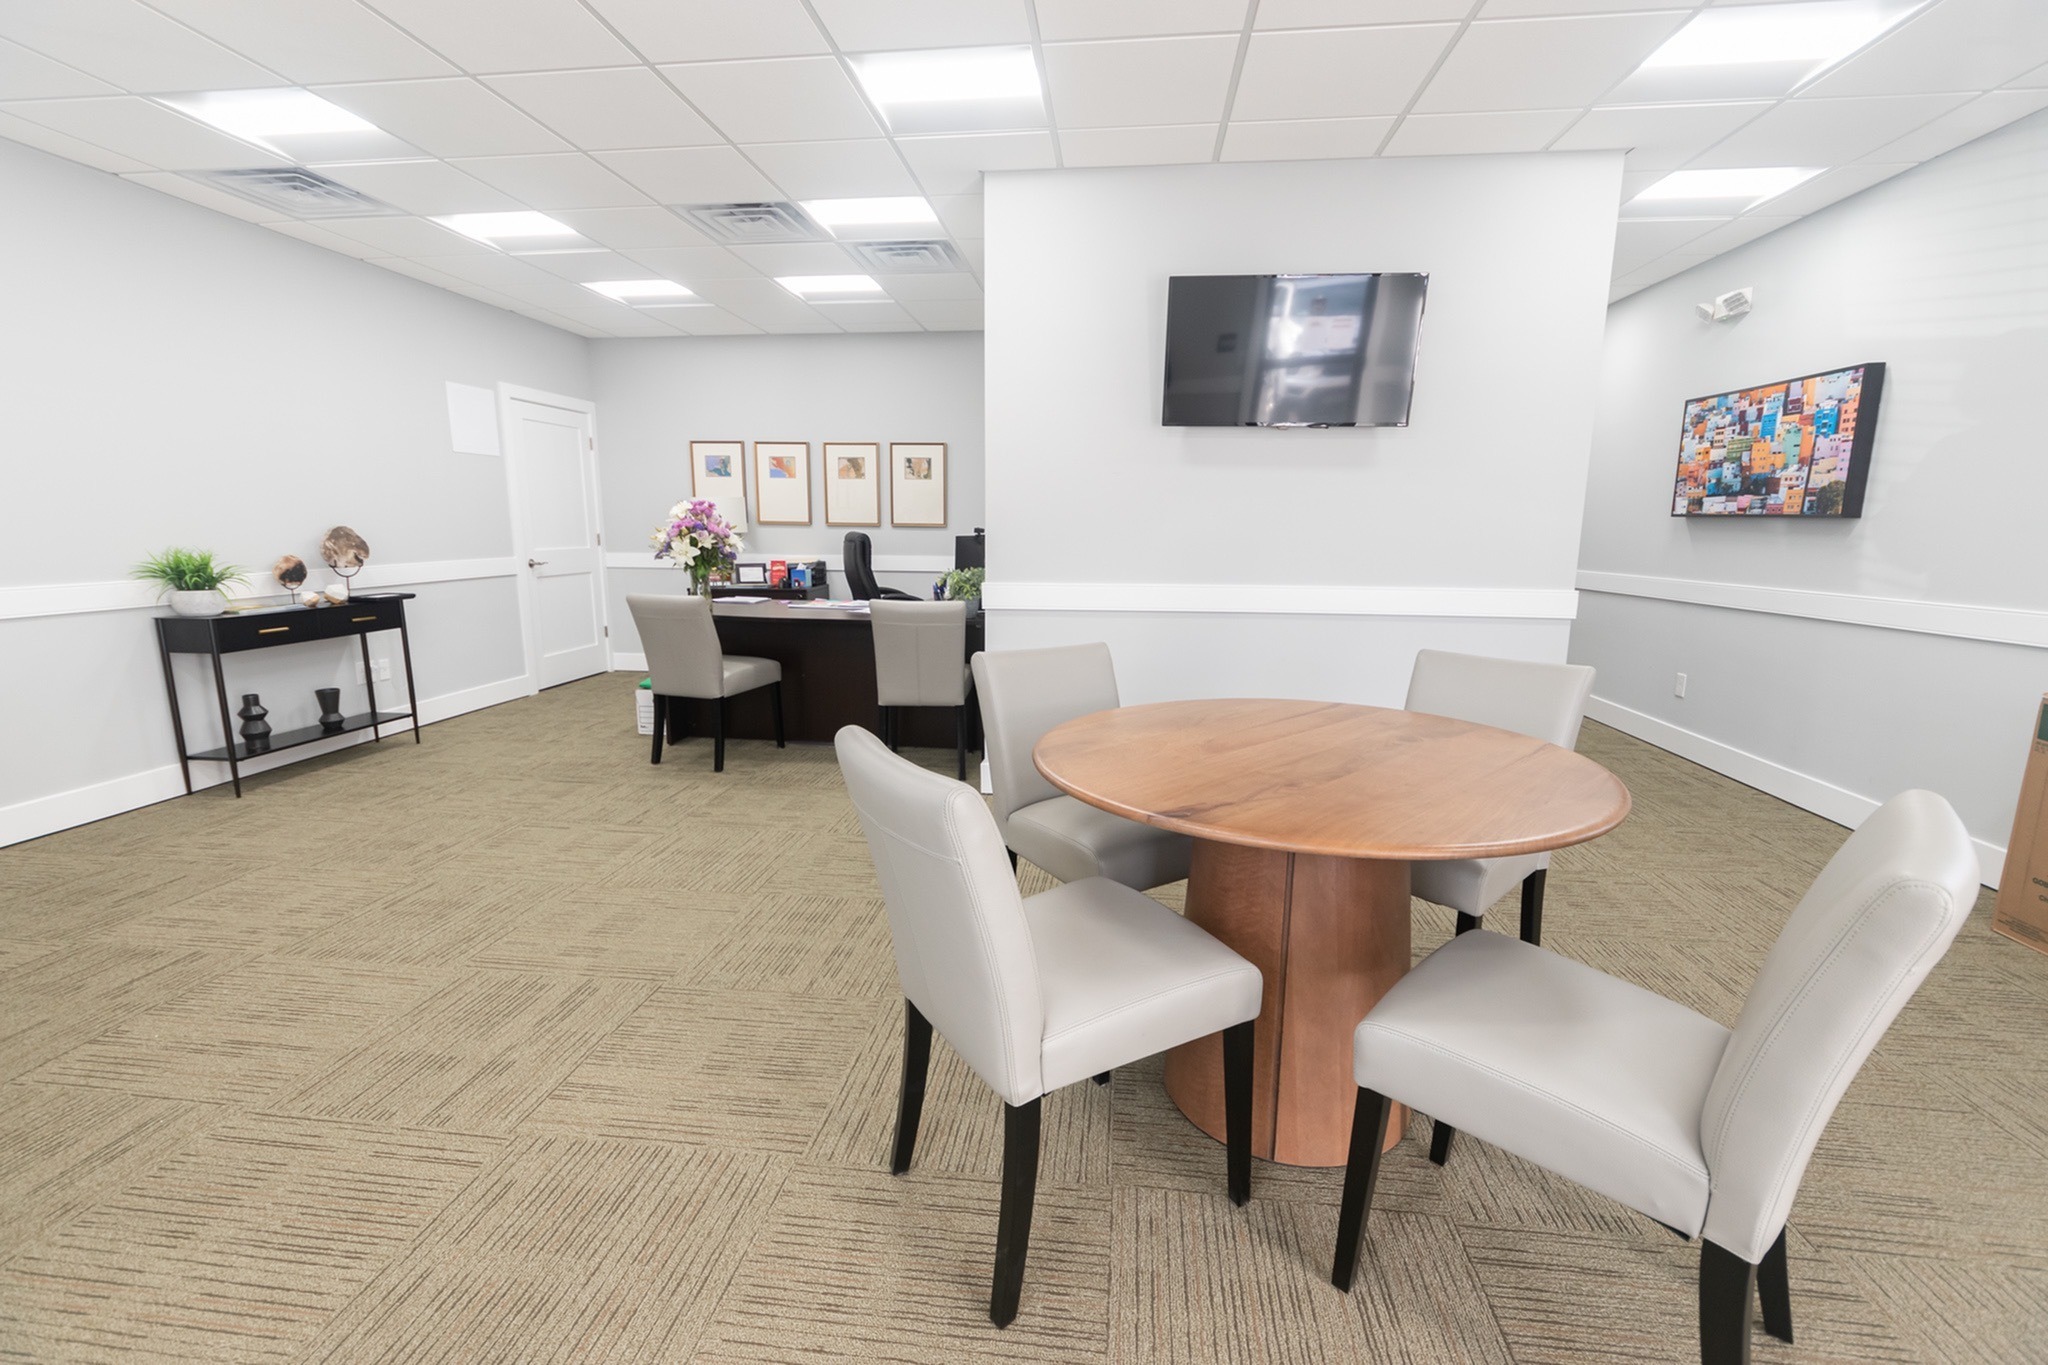 Leasing office with an office desk and a circular wooden table with four chairs.